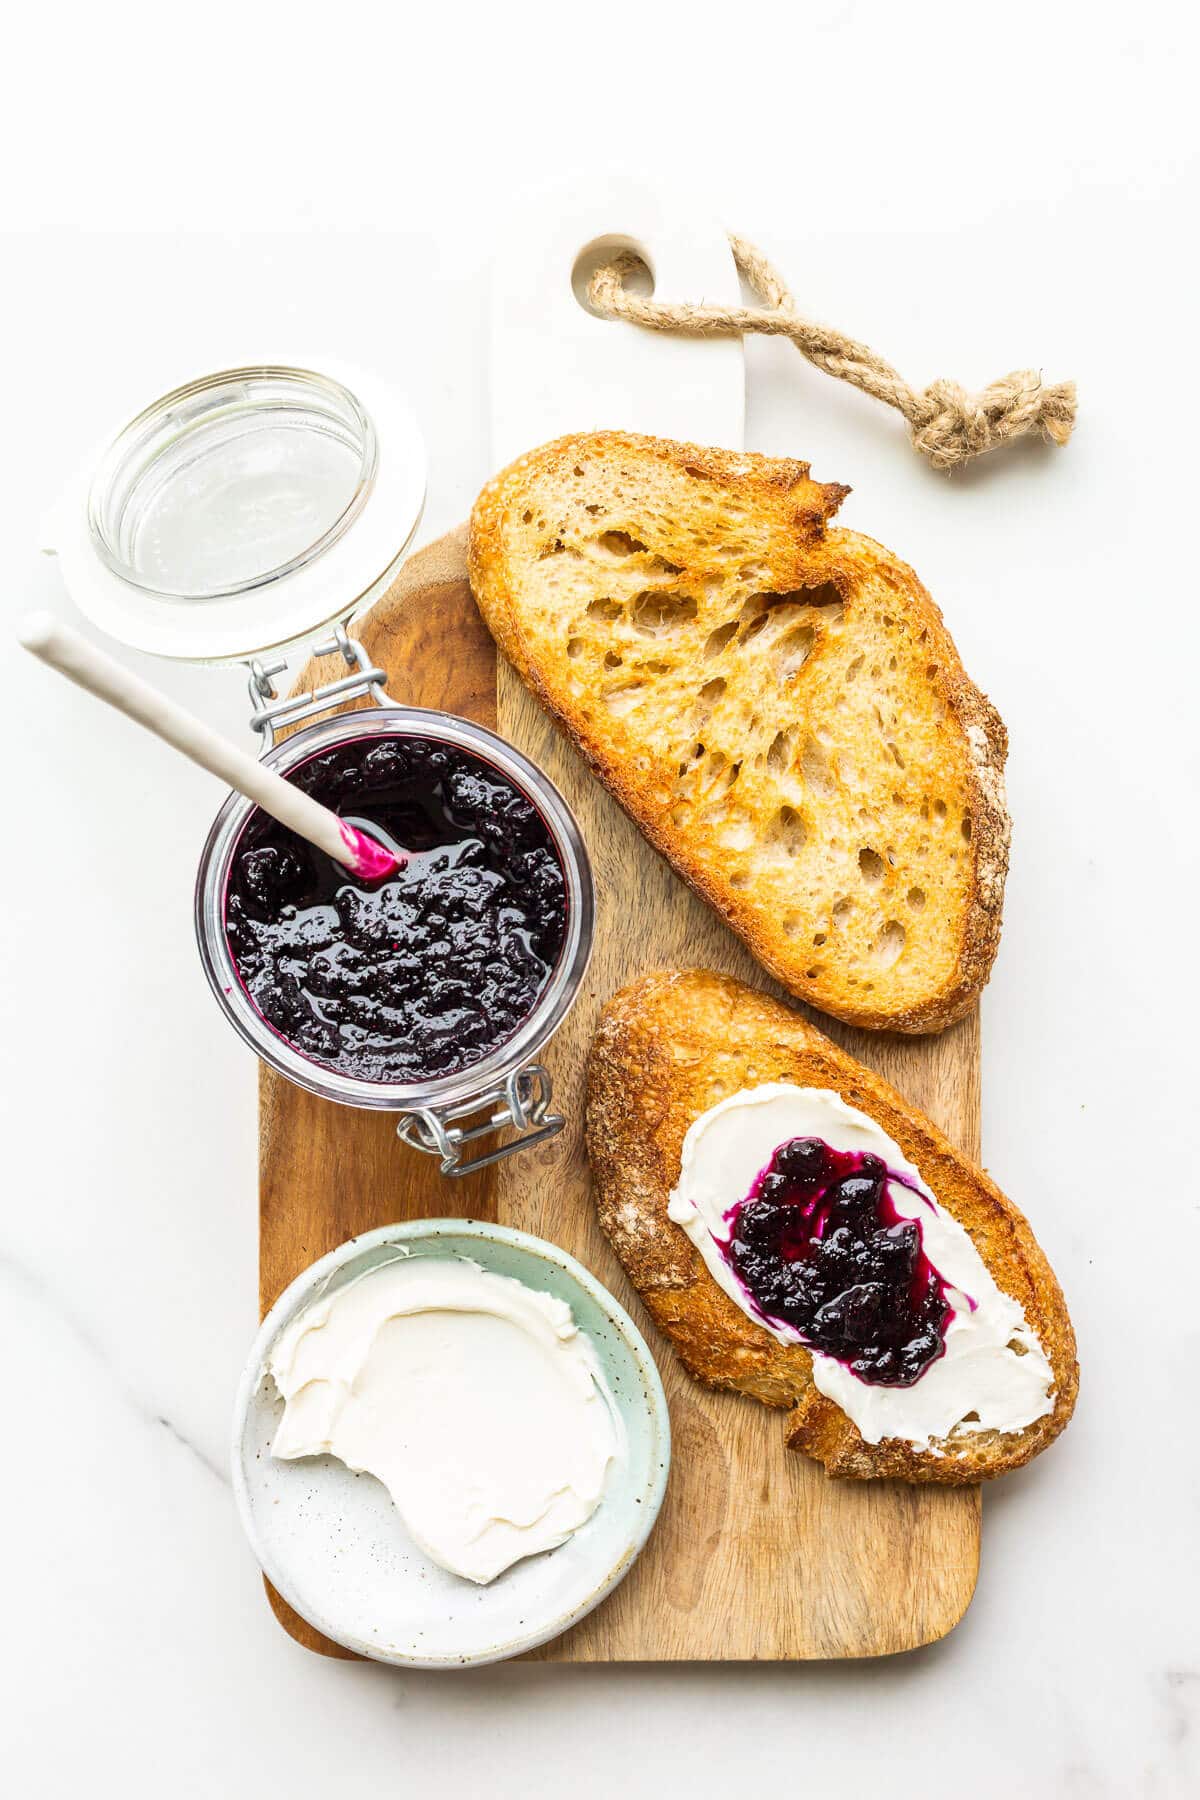 A jar of homemade blueberry jam served with cream cheese and toasted sourdough on a wood board.